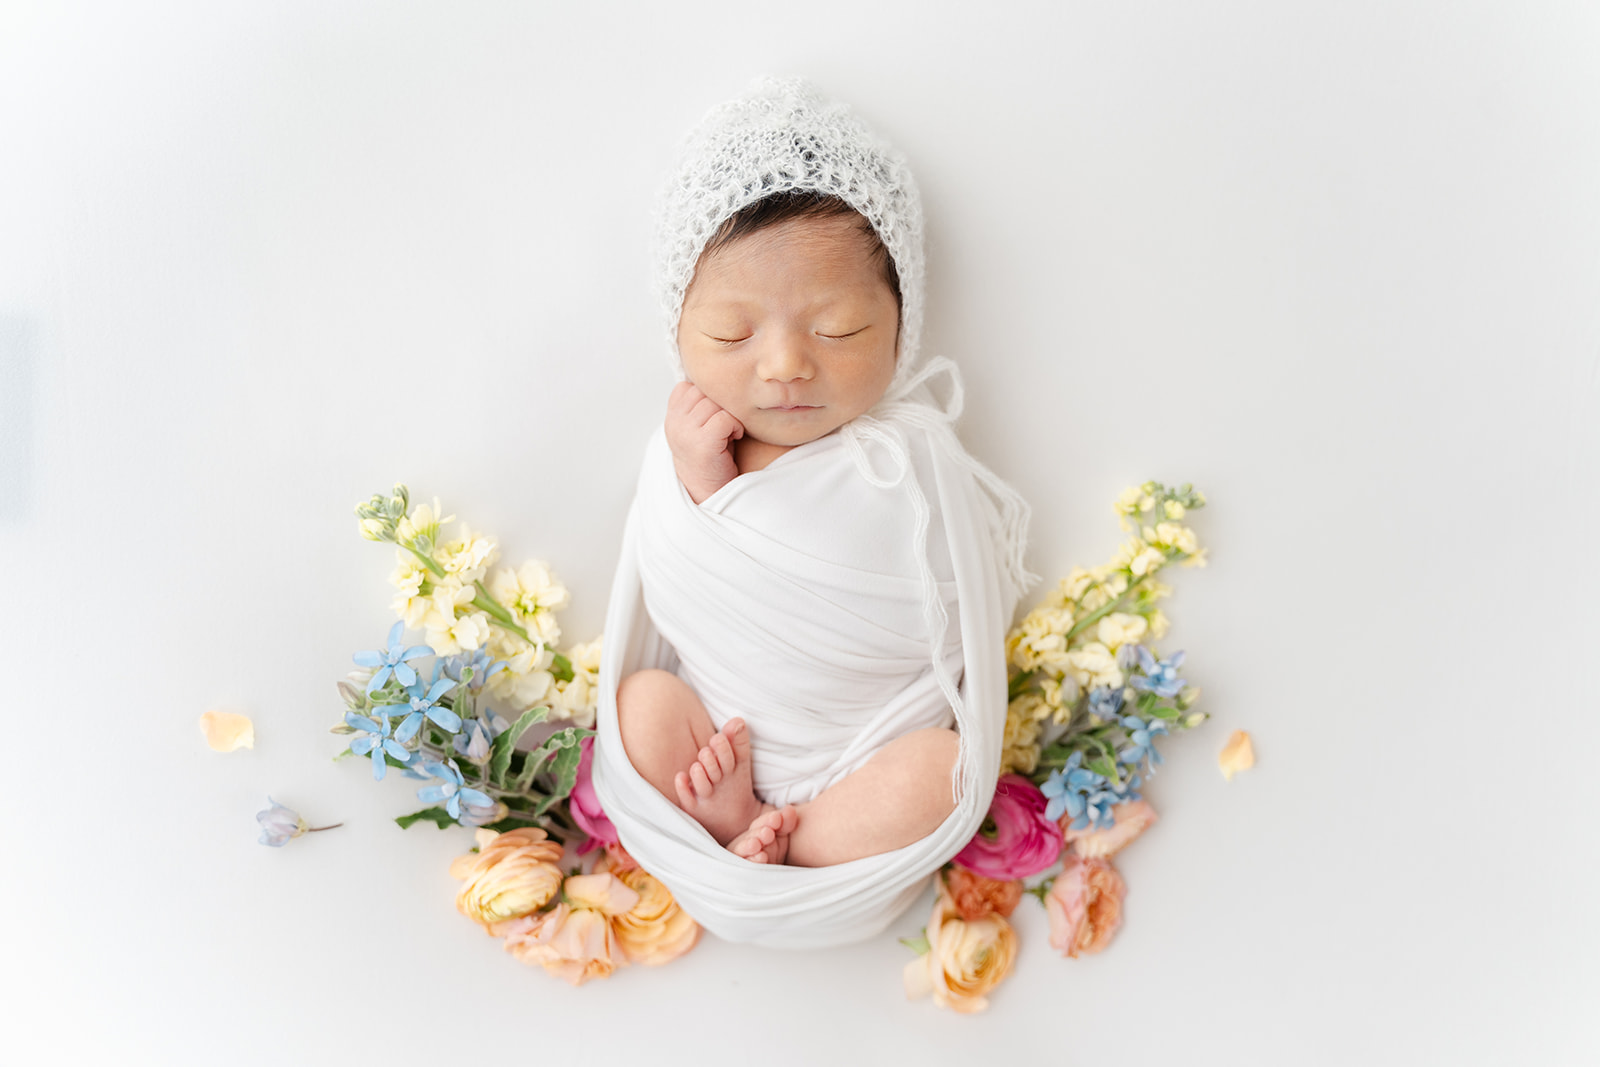 A newborn baby sleeps in a knit bonnet wirrounded by colorful flowers after using a Birthing Center Long Beach